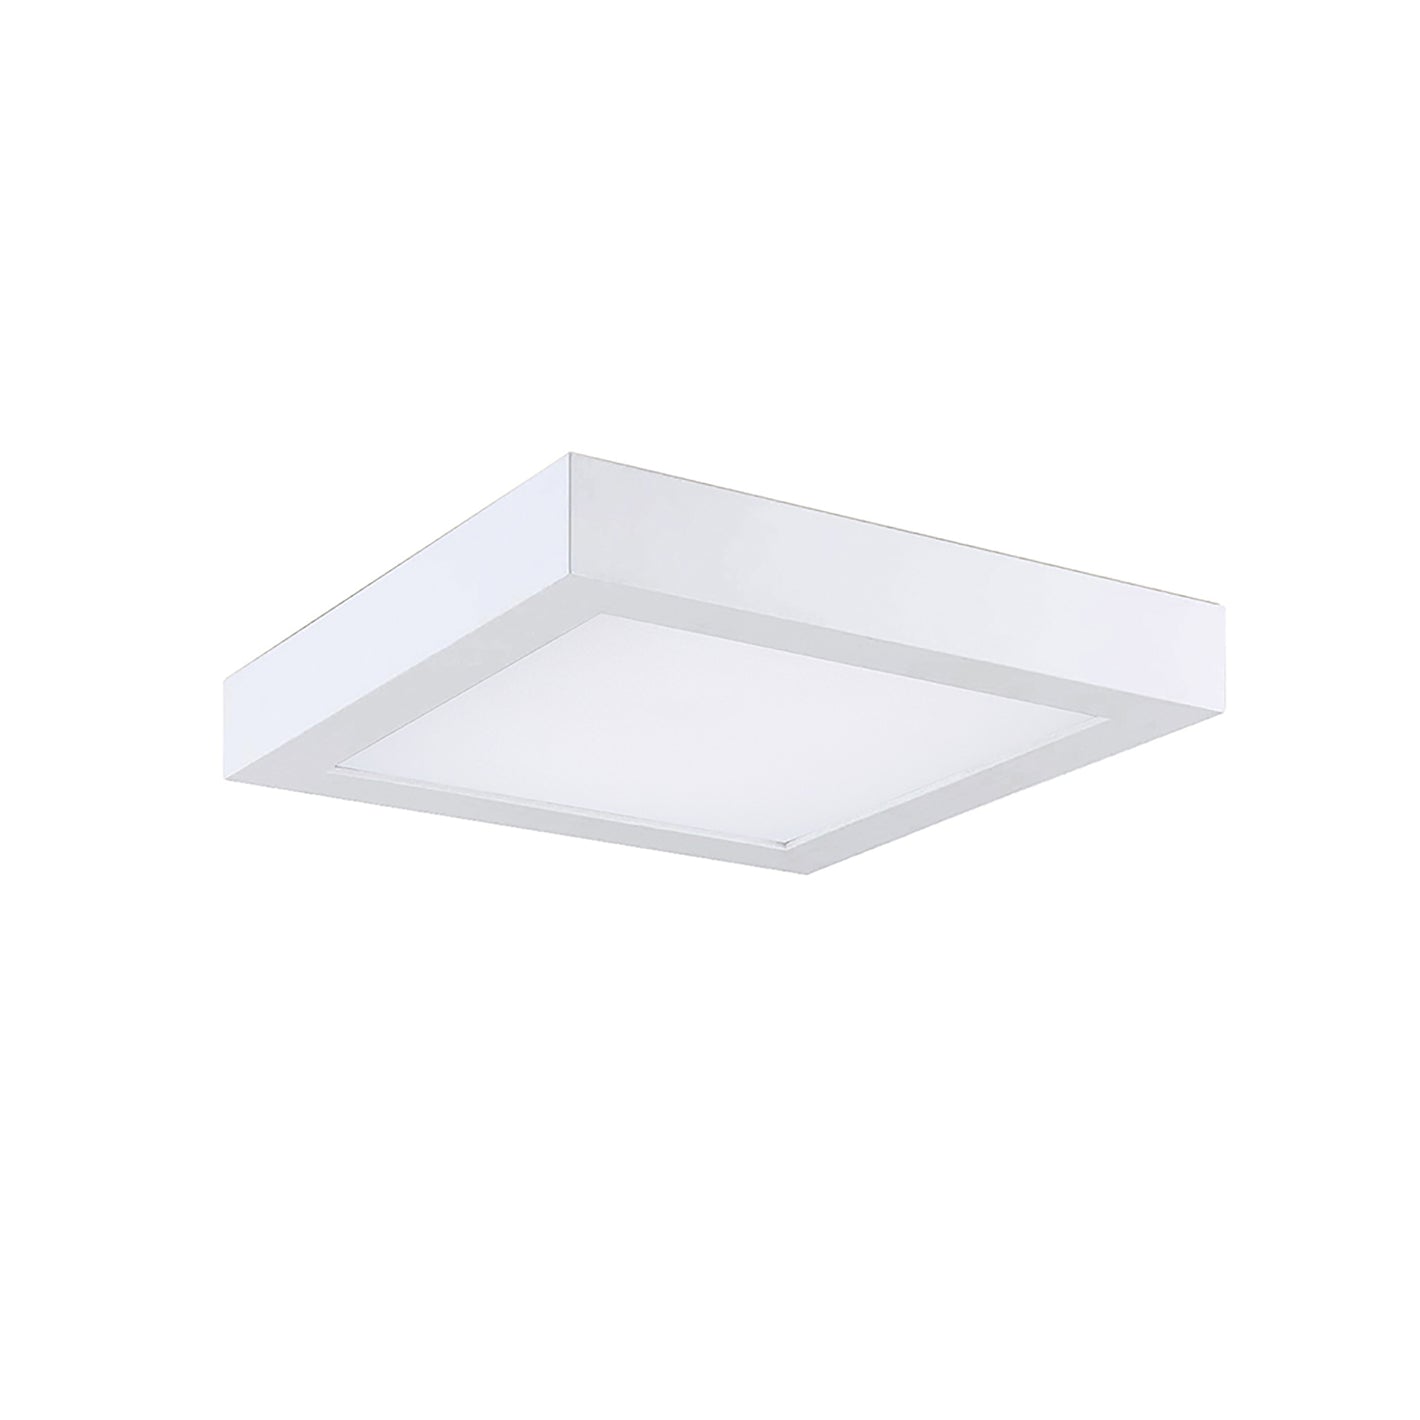 7 Inch Square 5CCT Color Selectable Surface Mount Panel Light Fixture, White Finish